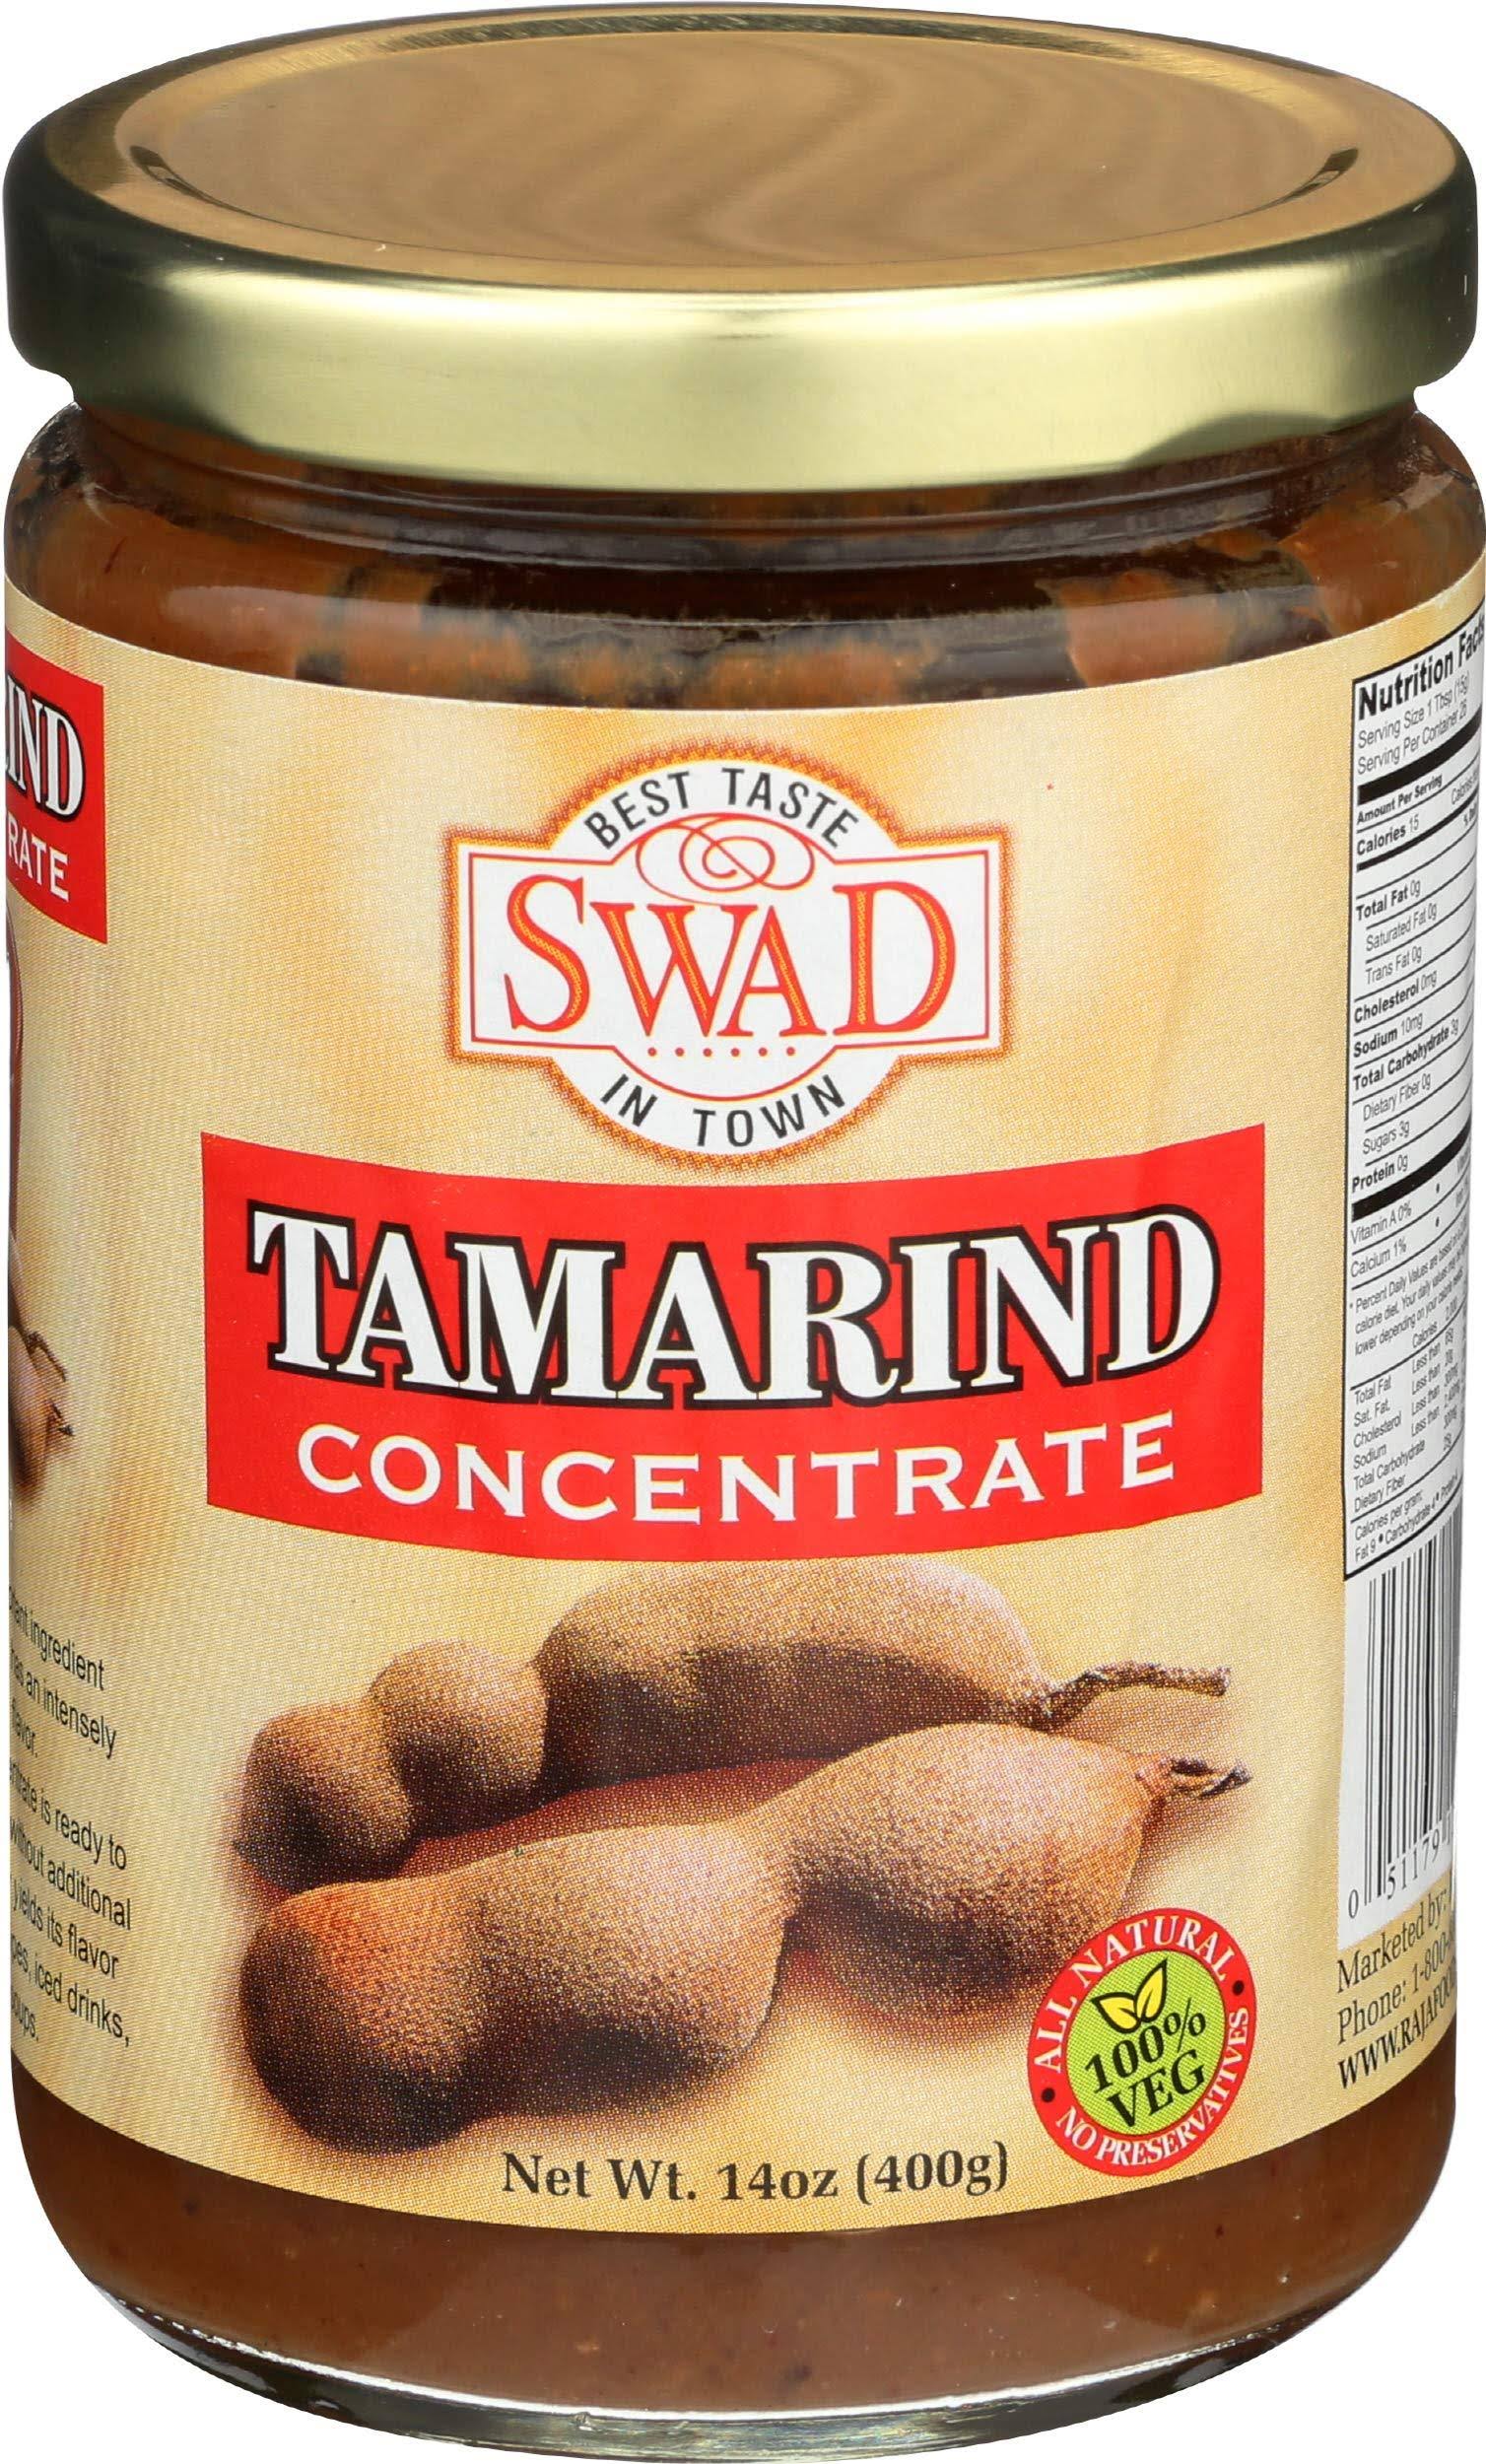 Swad Tamarind Concentrate - Case of 12 - 14 oz